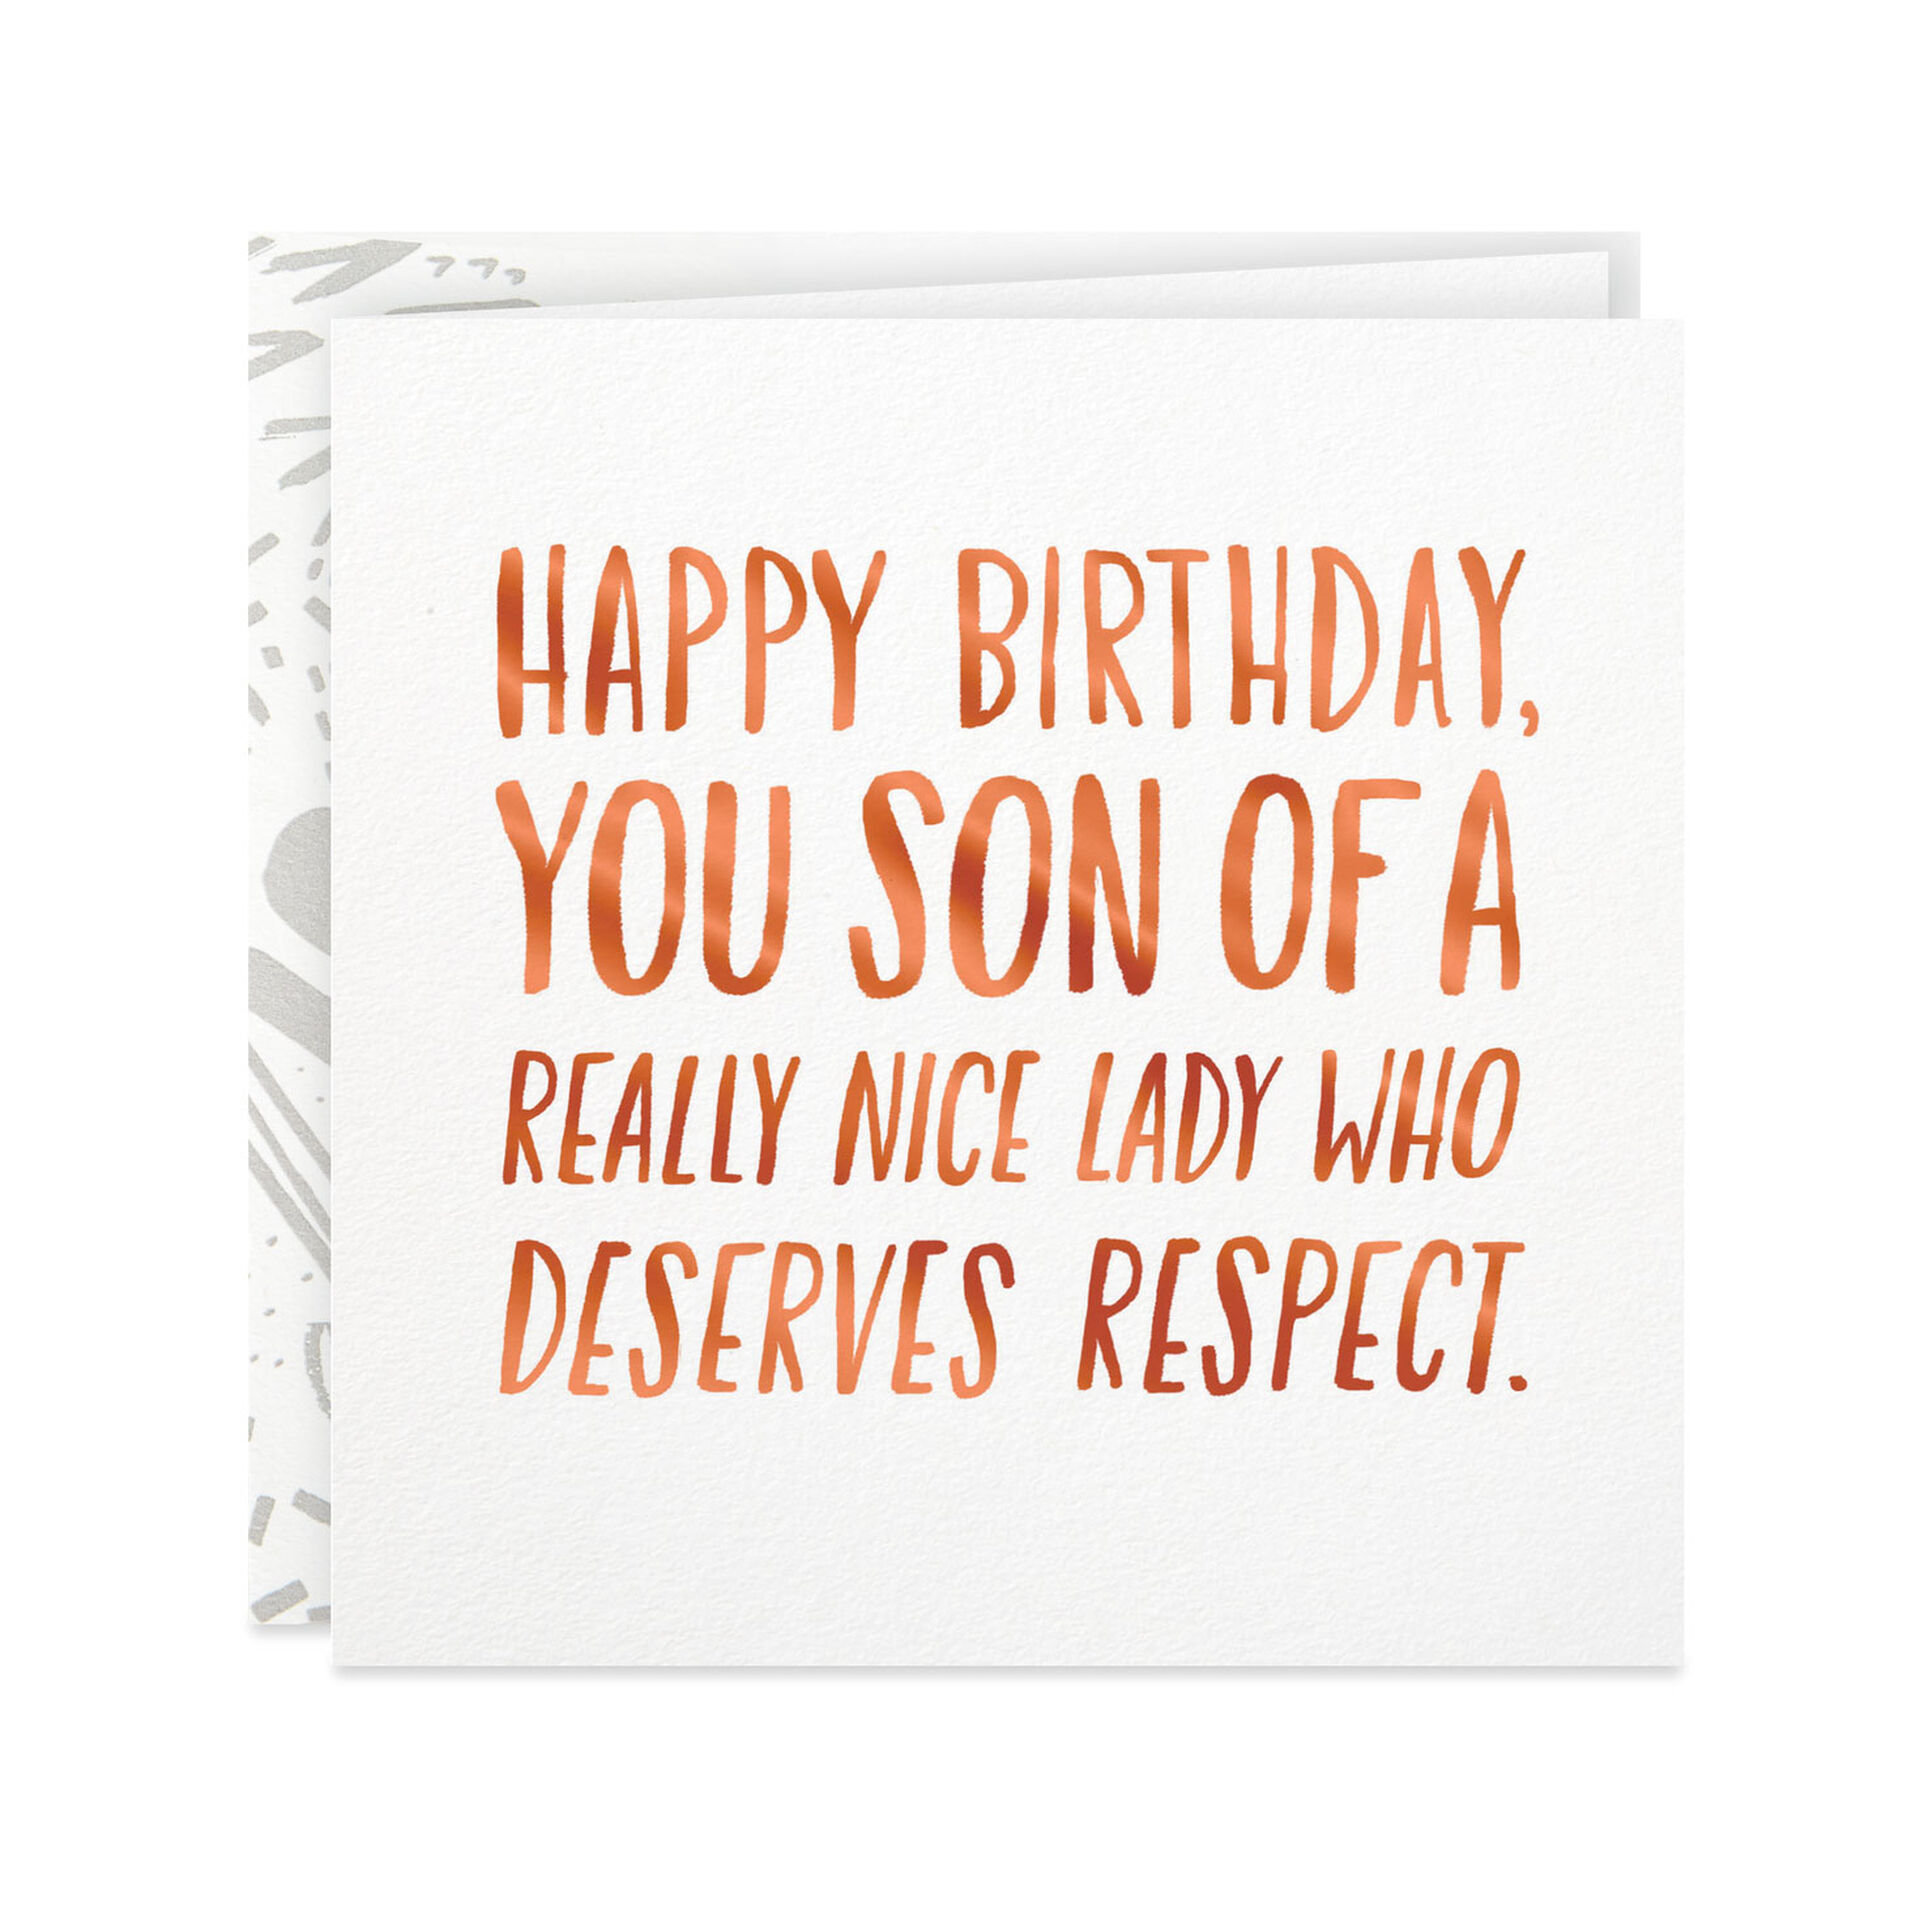 AllCaps-Lettering-Funny-Birthday-Card_359YYB1183_01